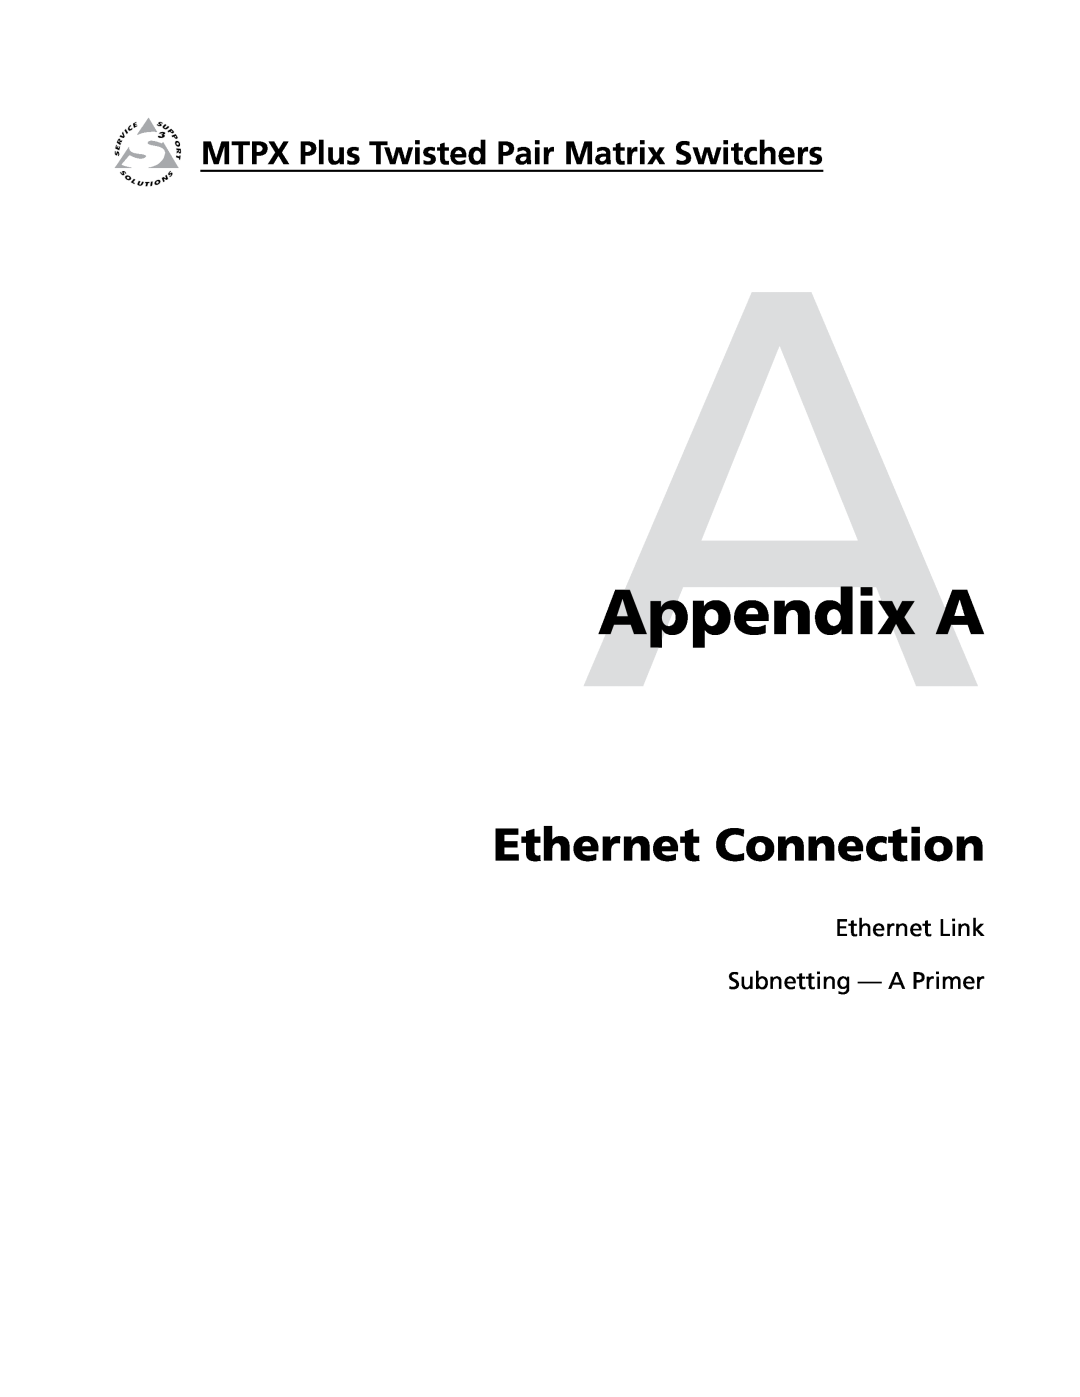 Extron electronic MTPX Plus Series manual AAppendix A, Ethernet Connection, Ethernet Link Subnetting - A Primer 